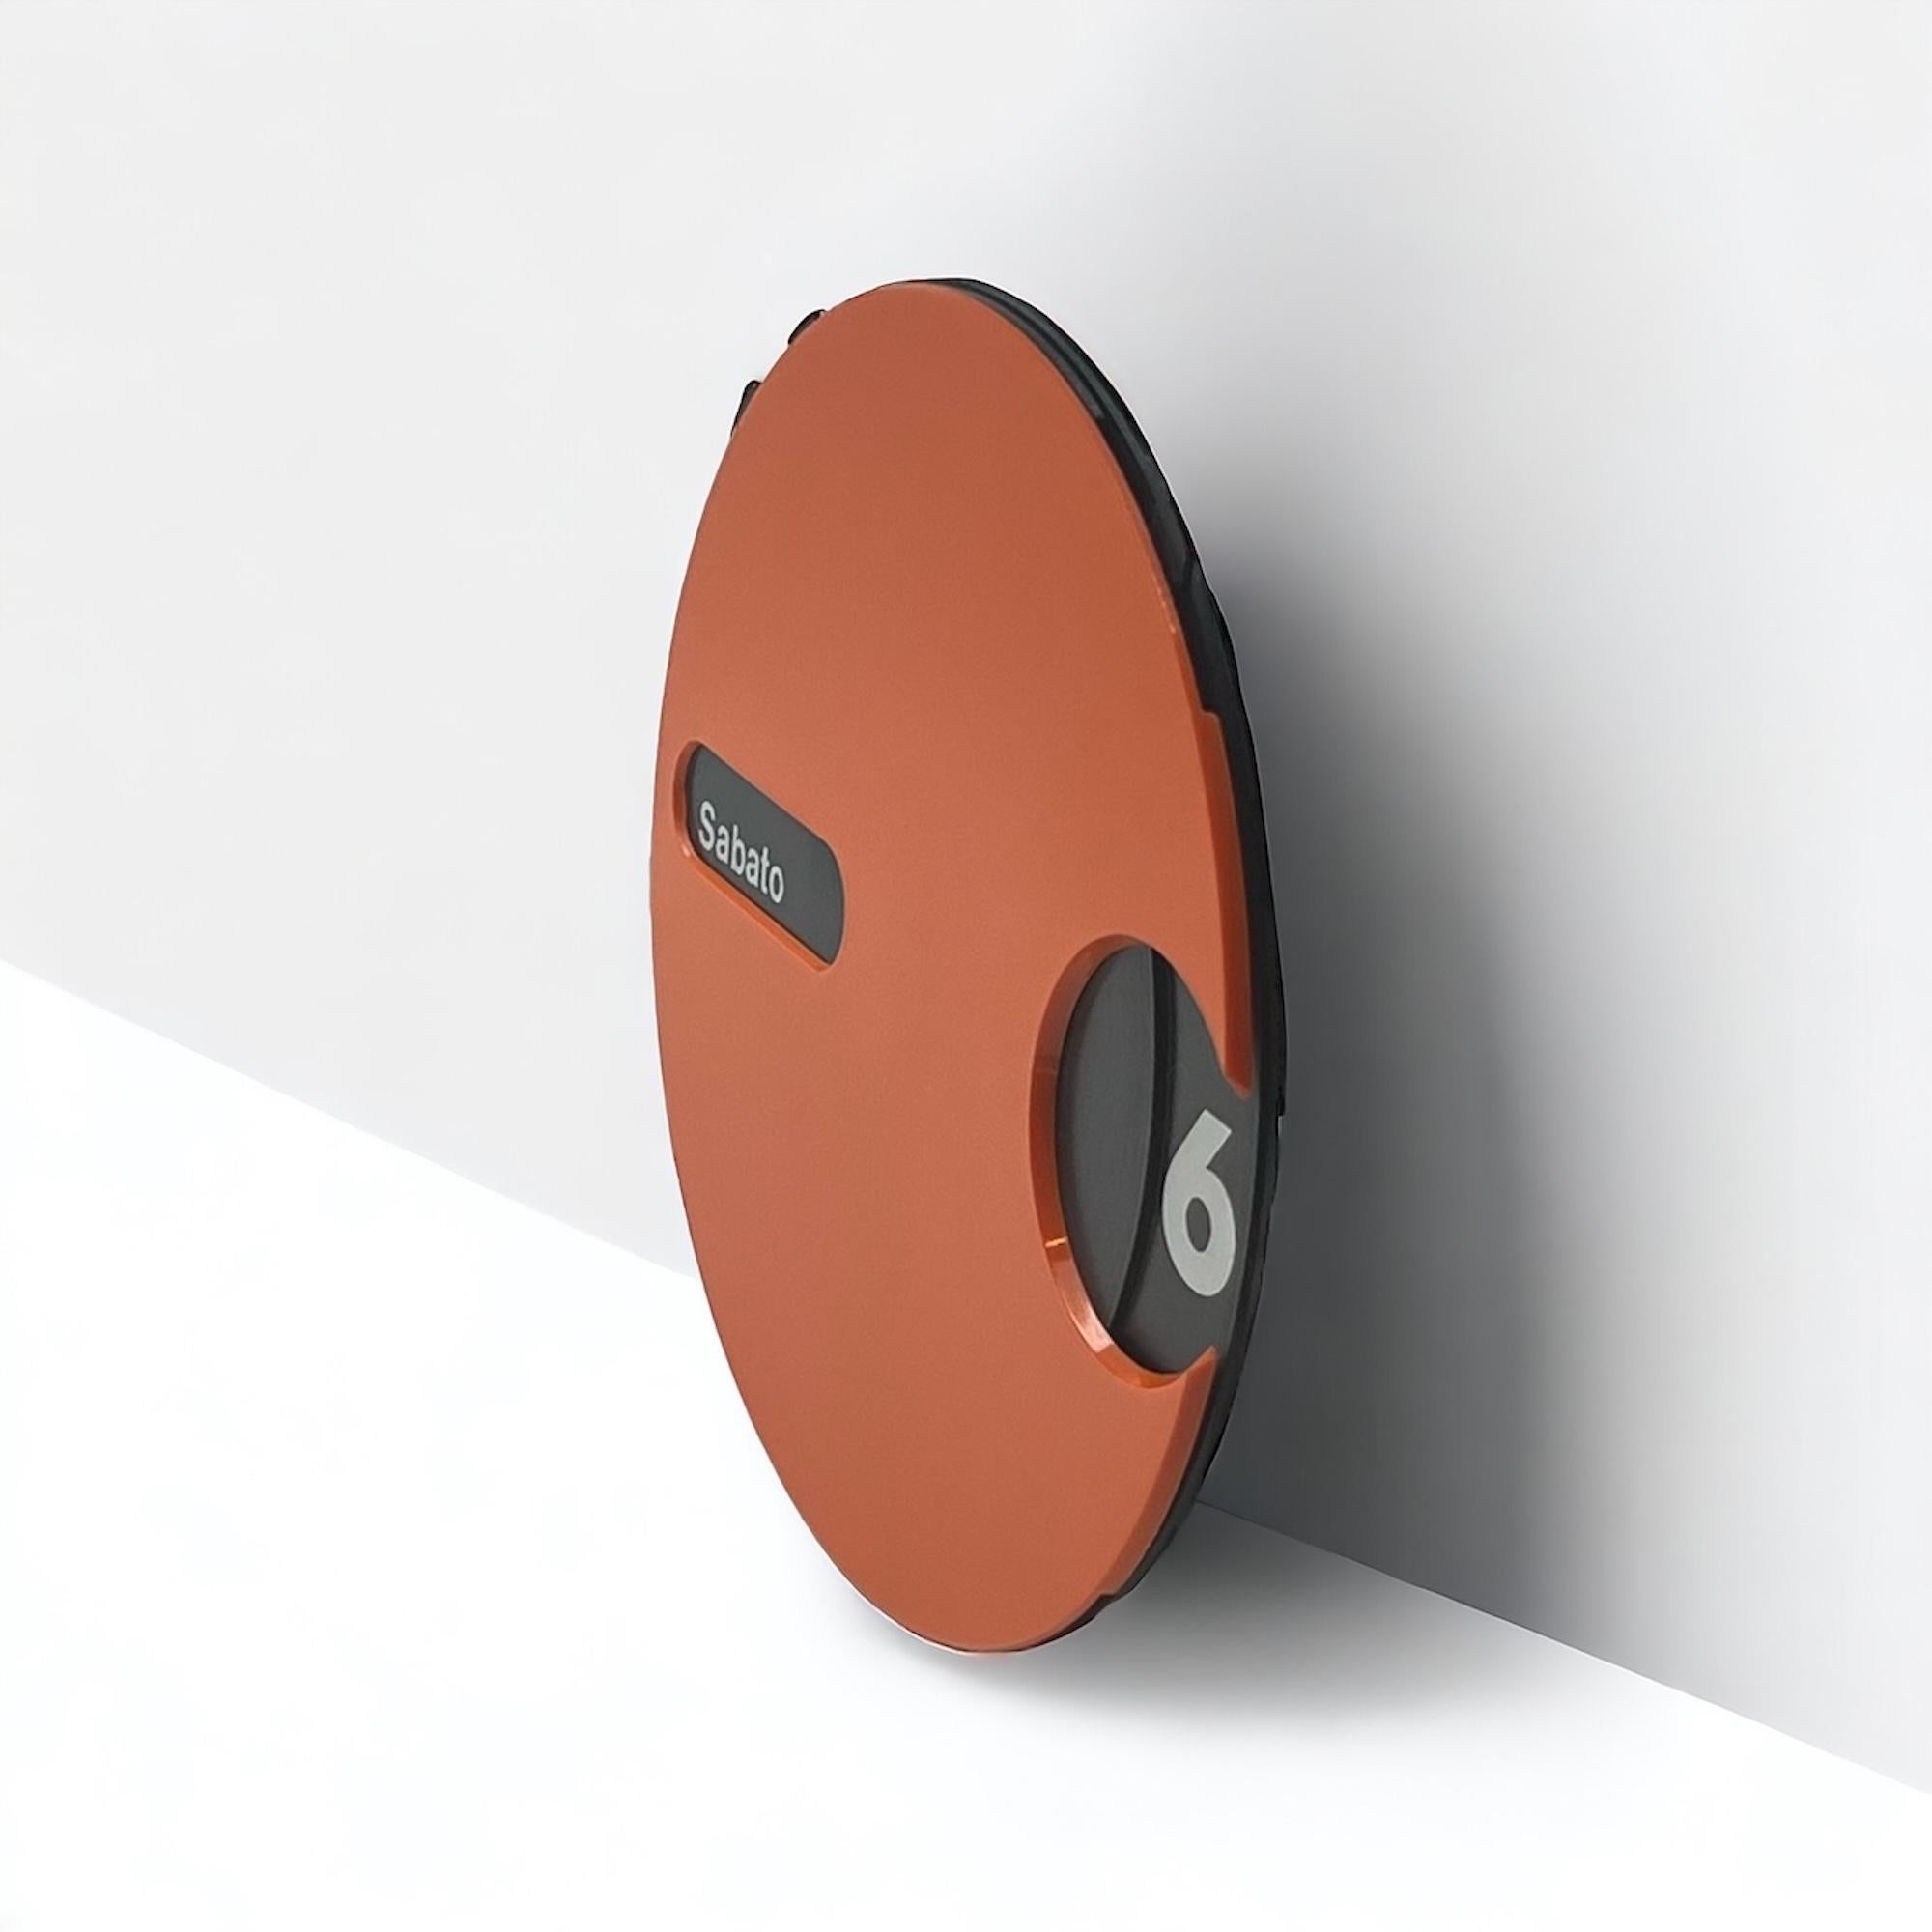 Journey back to the space age era with this rare Italian wall calendar, a true testament to retro-futuristic design. Crafted in the 1970s, this space age calendar features a distinctive circular orange body adorned with a rotating black dial,